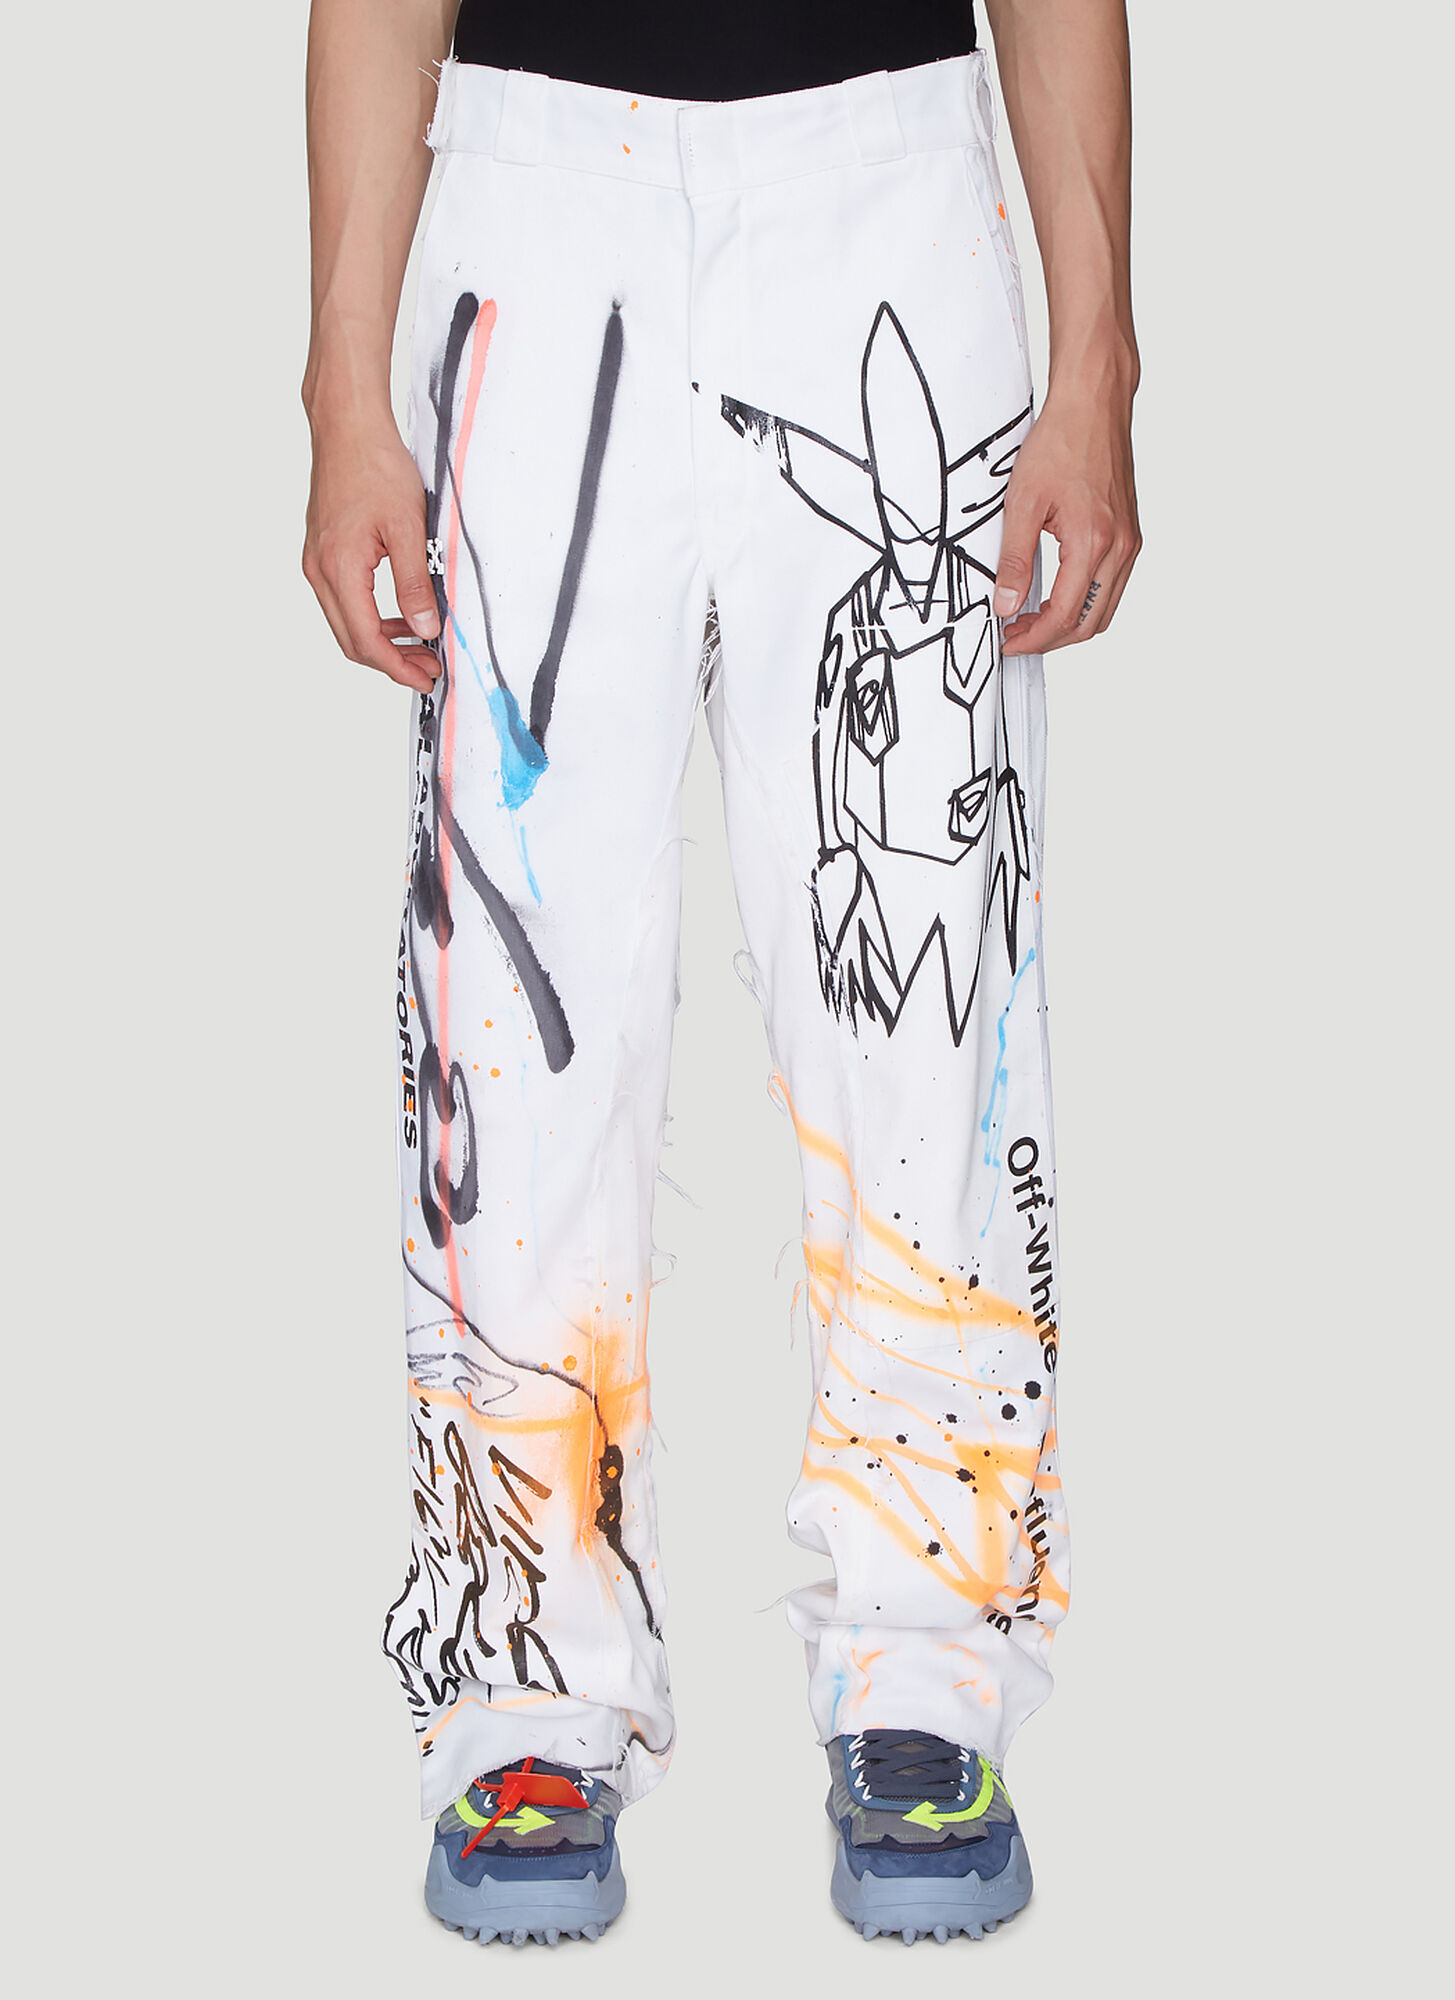 Off-White Wide-Leg Printed Pants in White size 28 | The Fashionisto